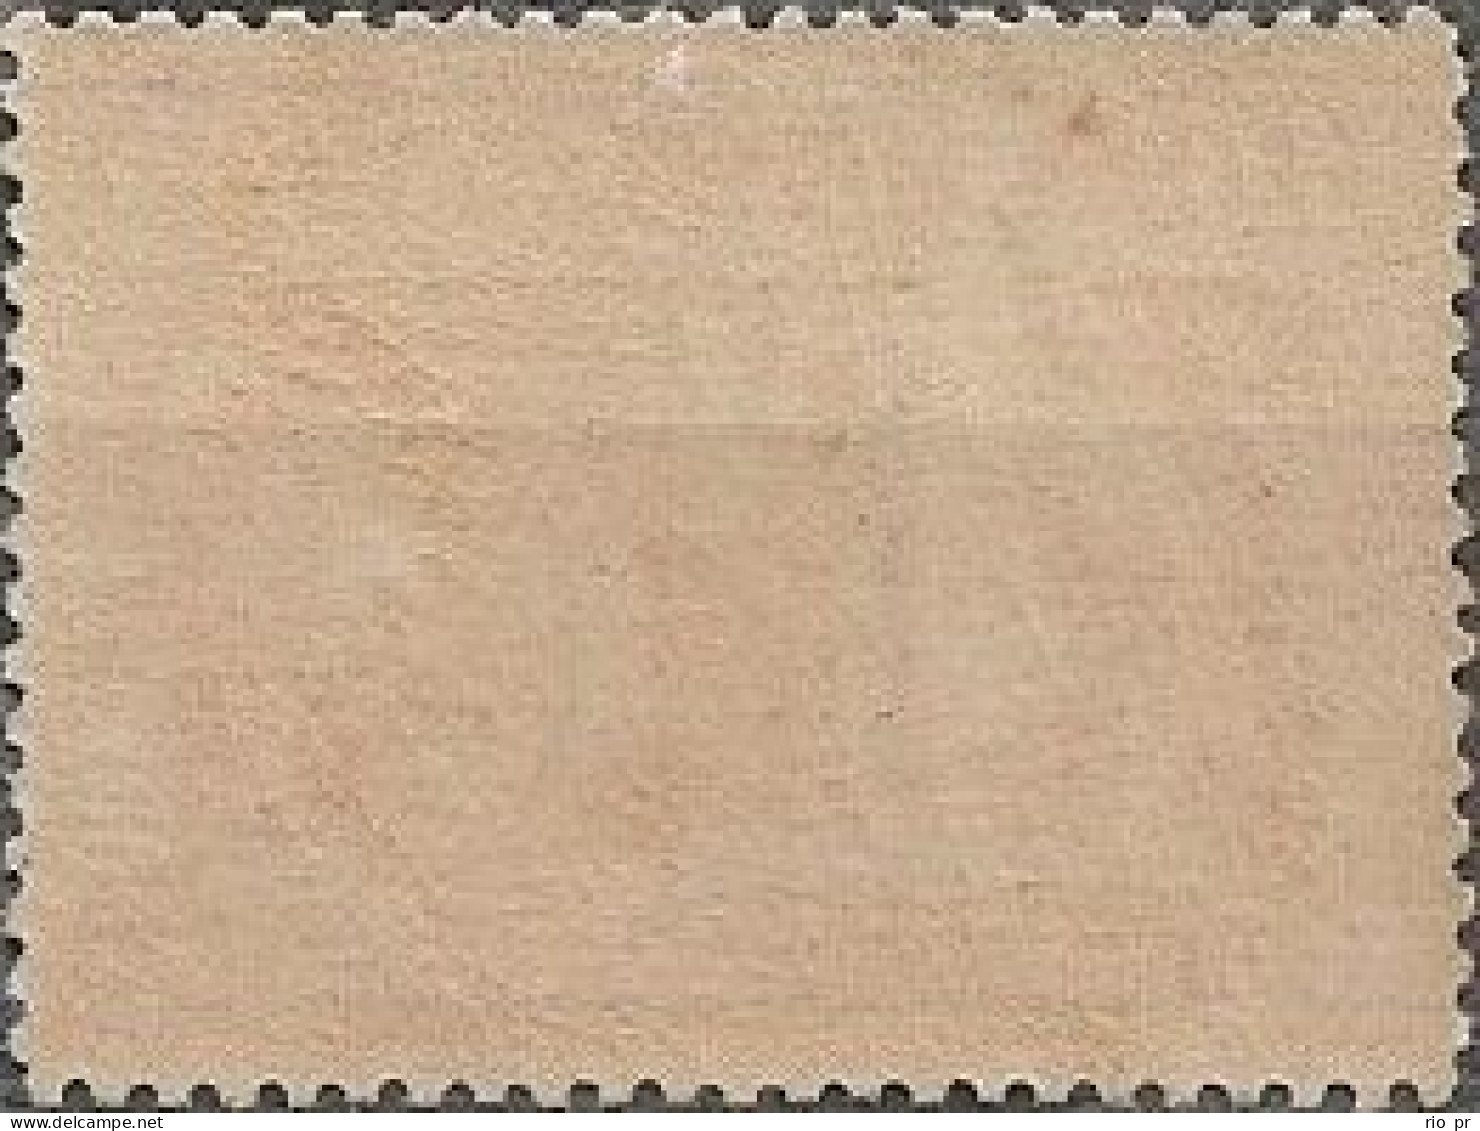 BRAZIL - CENTENARY OF NATIONAL INDEPENDENCE AND NAT. EXPOSITION (200 RÉIS, RED, D.PEDRO I/J.BONIFÁCIO) 1922 - MNH - Unused Stamps